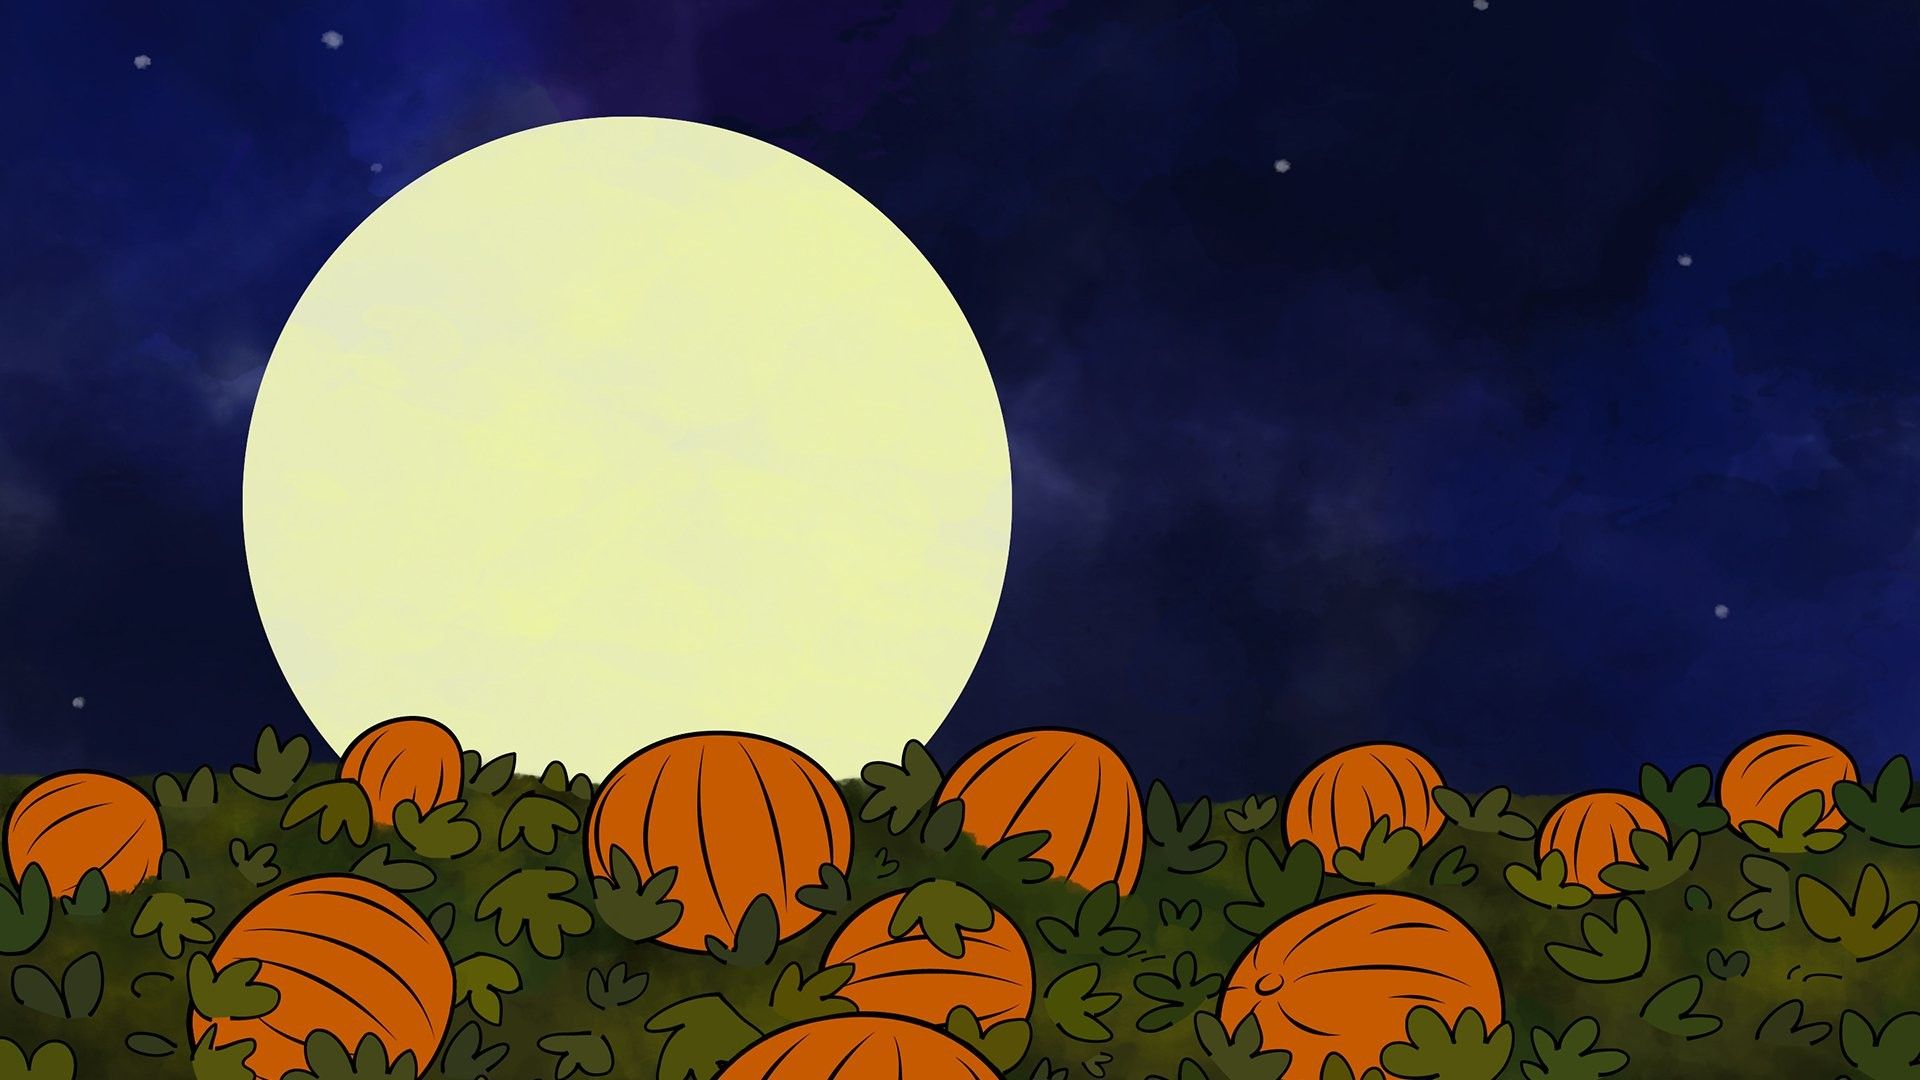 A pumpkin patch with a full moon in the background. - Halloween desktop, Charlie Brown